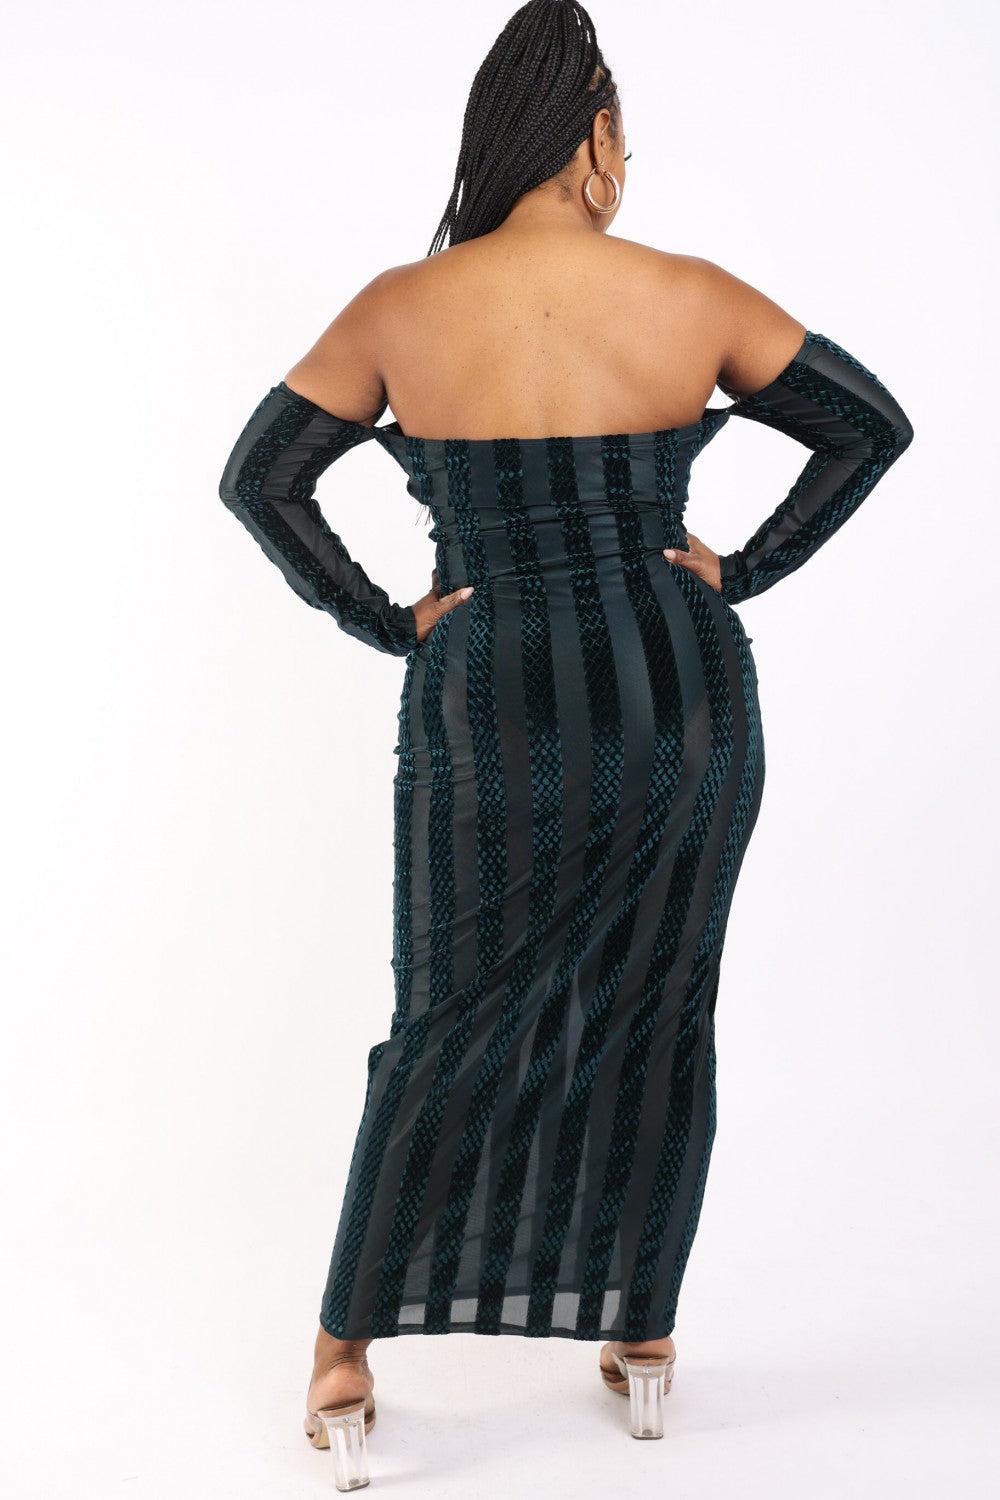 Hunter Off The Shoulder Striped Velvet Maxi Dress - Shopping Therapy 1XL Maxi Dresses